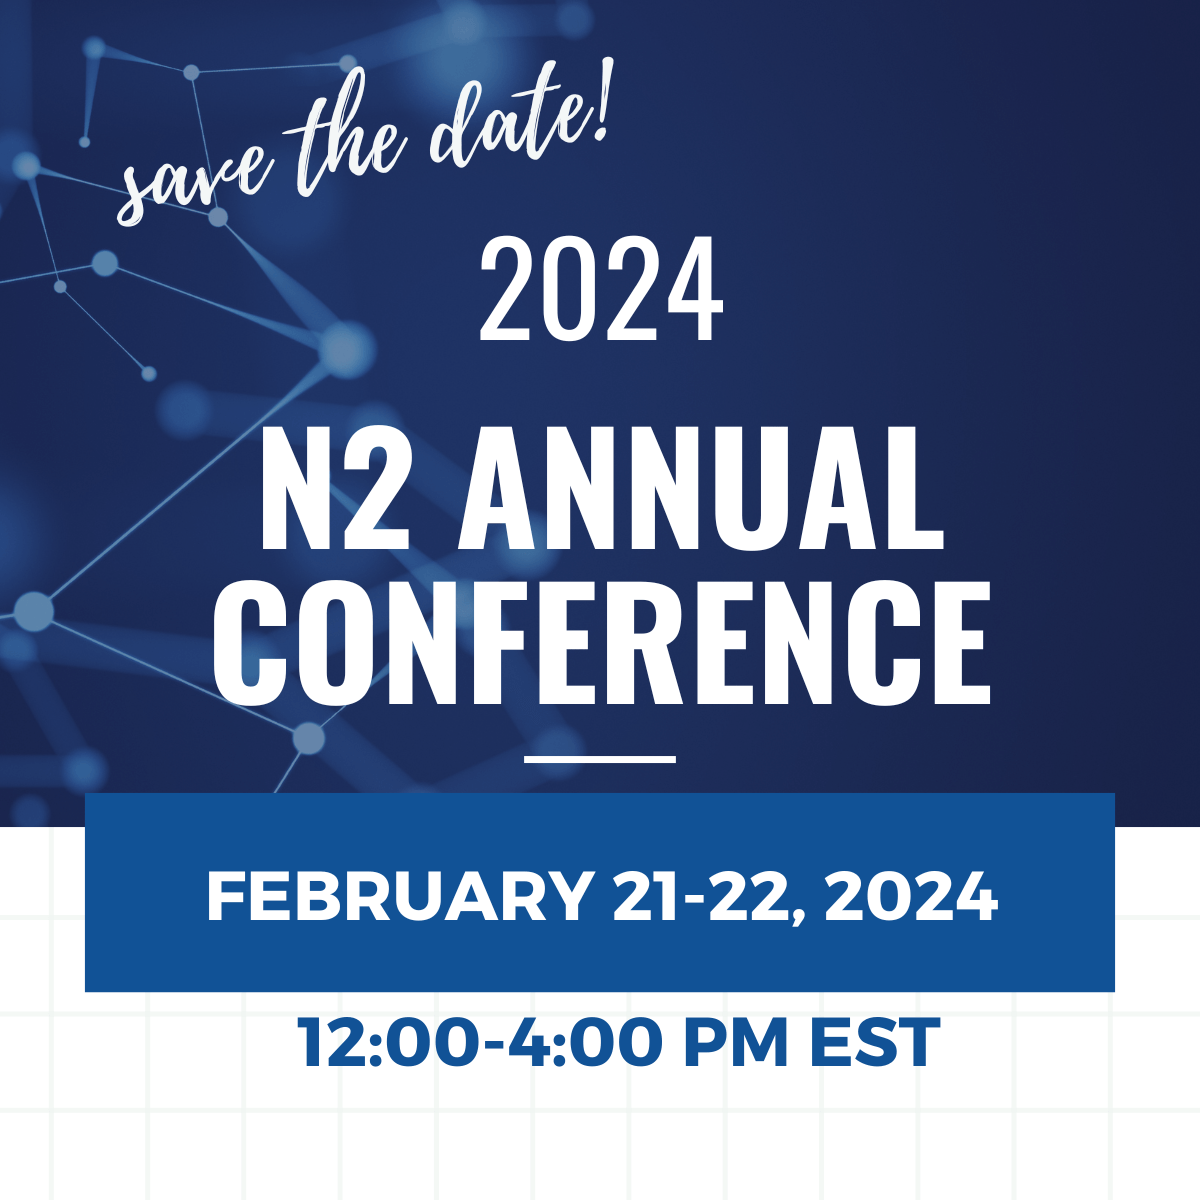 Save the Date for the 2024 N2 Annual Conference! N2 Canada